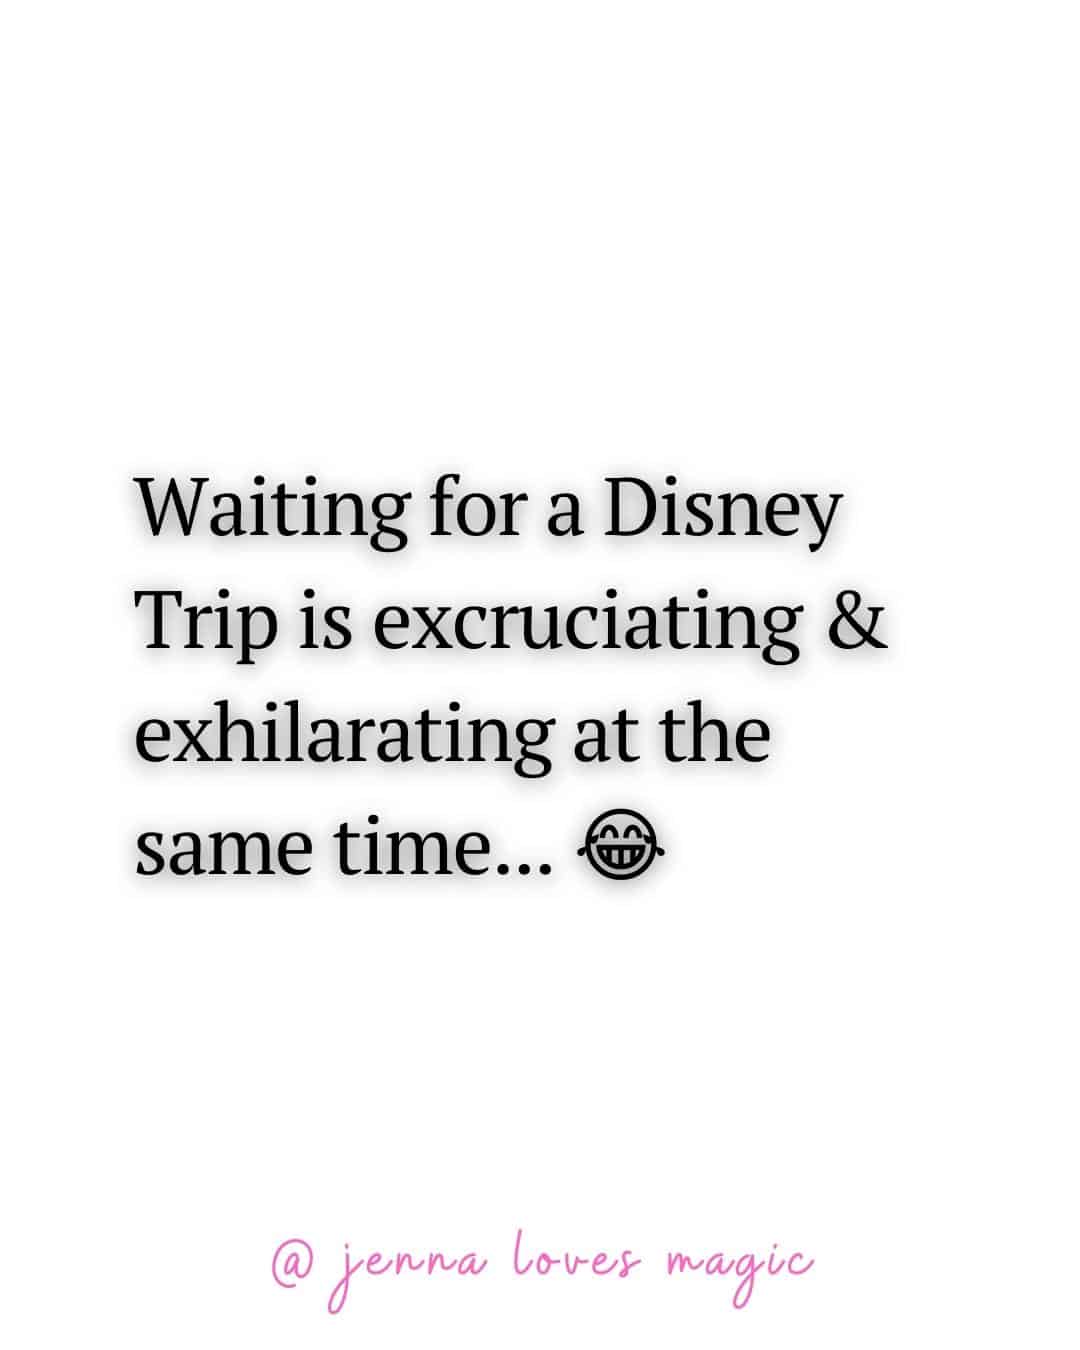 Waiting for a Disney Trip quote funny